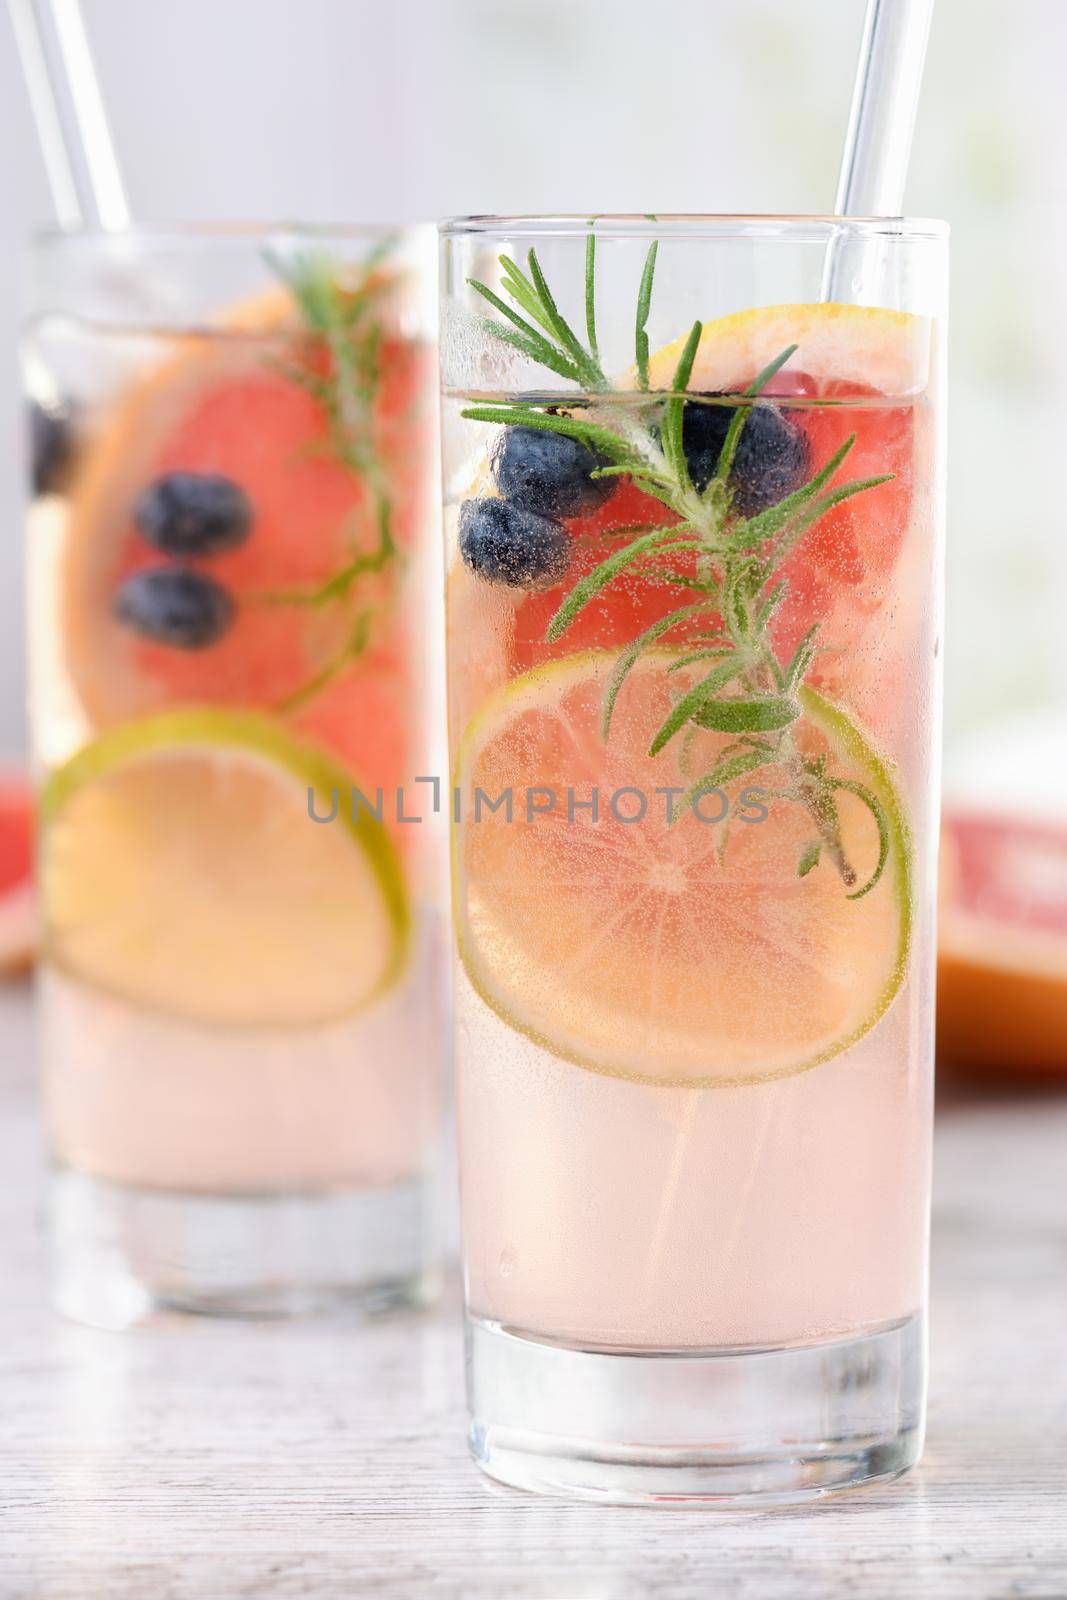 Paloma cocktail or lemonade with lime, grapefruit, blueberries and rosemary. Refreshing organic drink